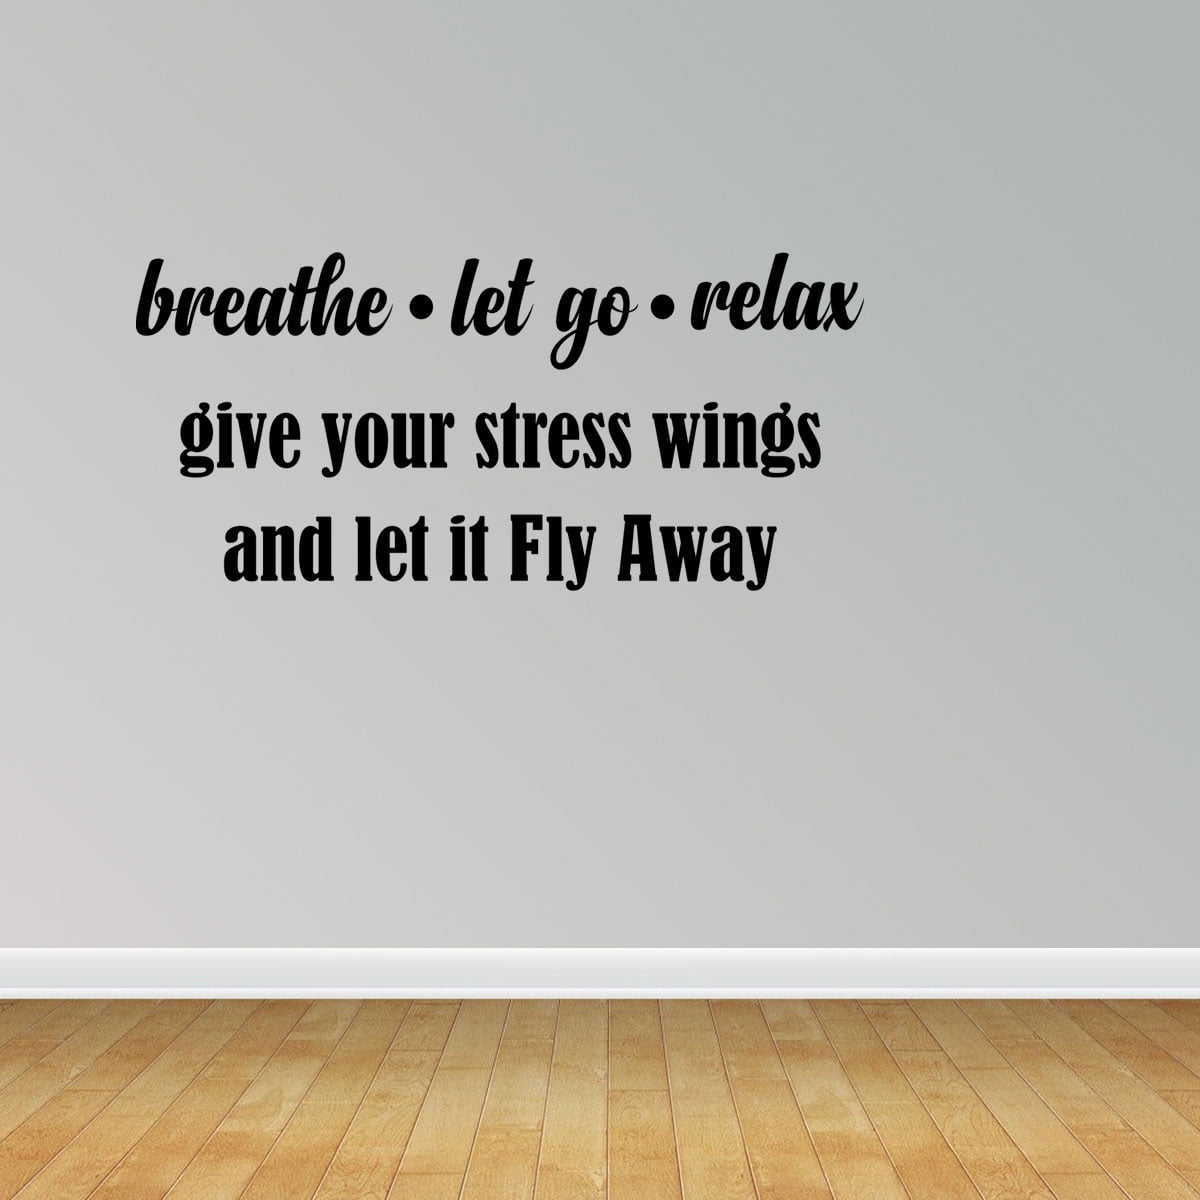 Wall Decal Quote Breathe Let Go Relax Give Your Stress Wings And Let It Fly Away Sticker Room Decor Jp505 Walmart Com Walmart Com